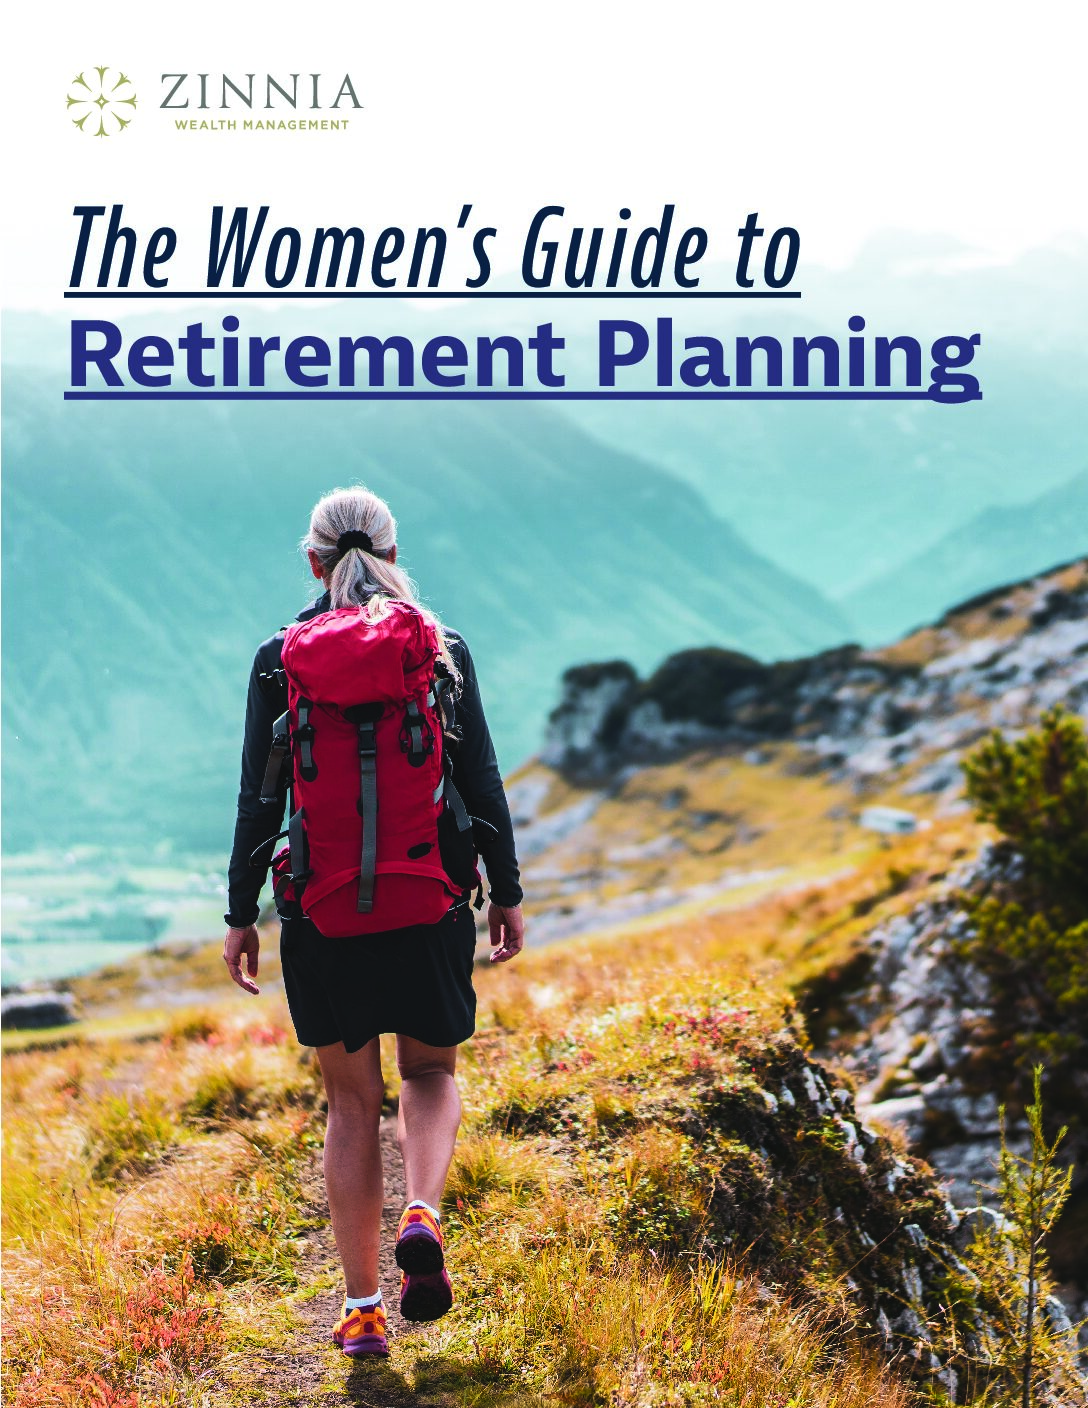 The Women's Guide To Retirement Planning